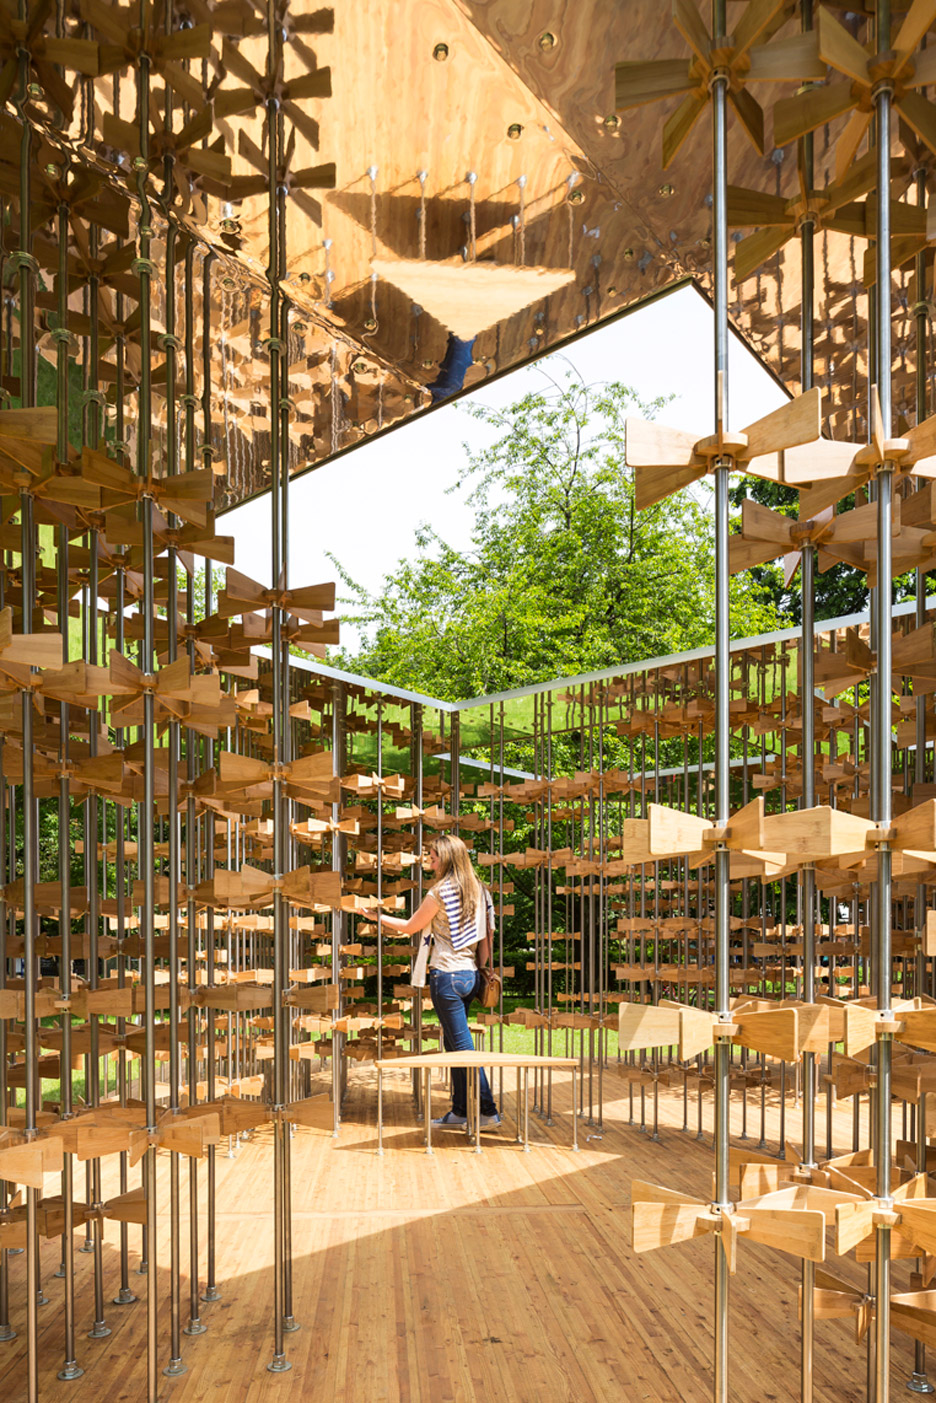 This years Triumph Pavilion by Five Line Projects is based on the theme Energy